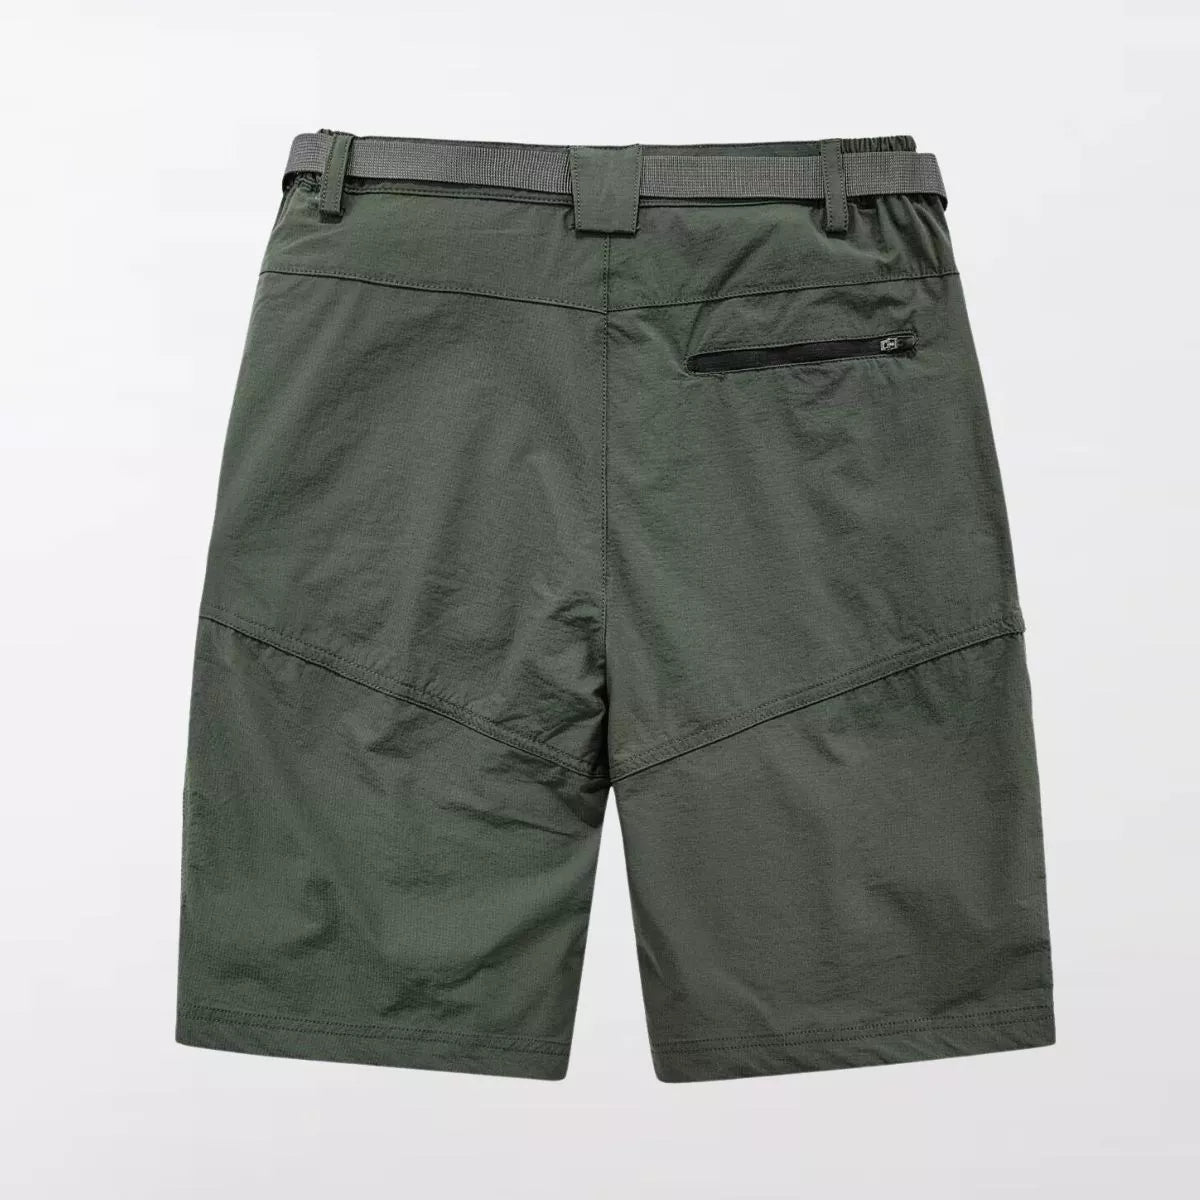 Image Of The S/23 Summer Techwear Shorts. Army Green Color from behind